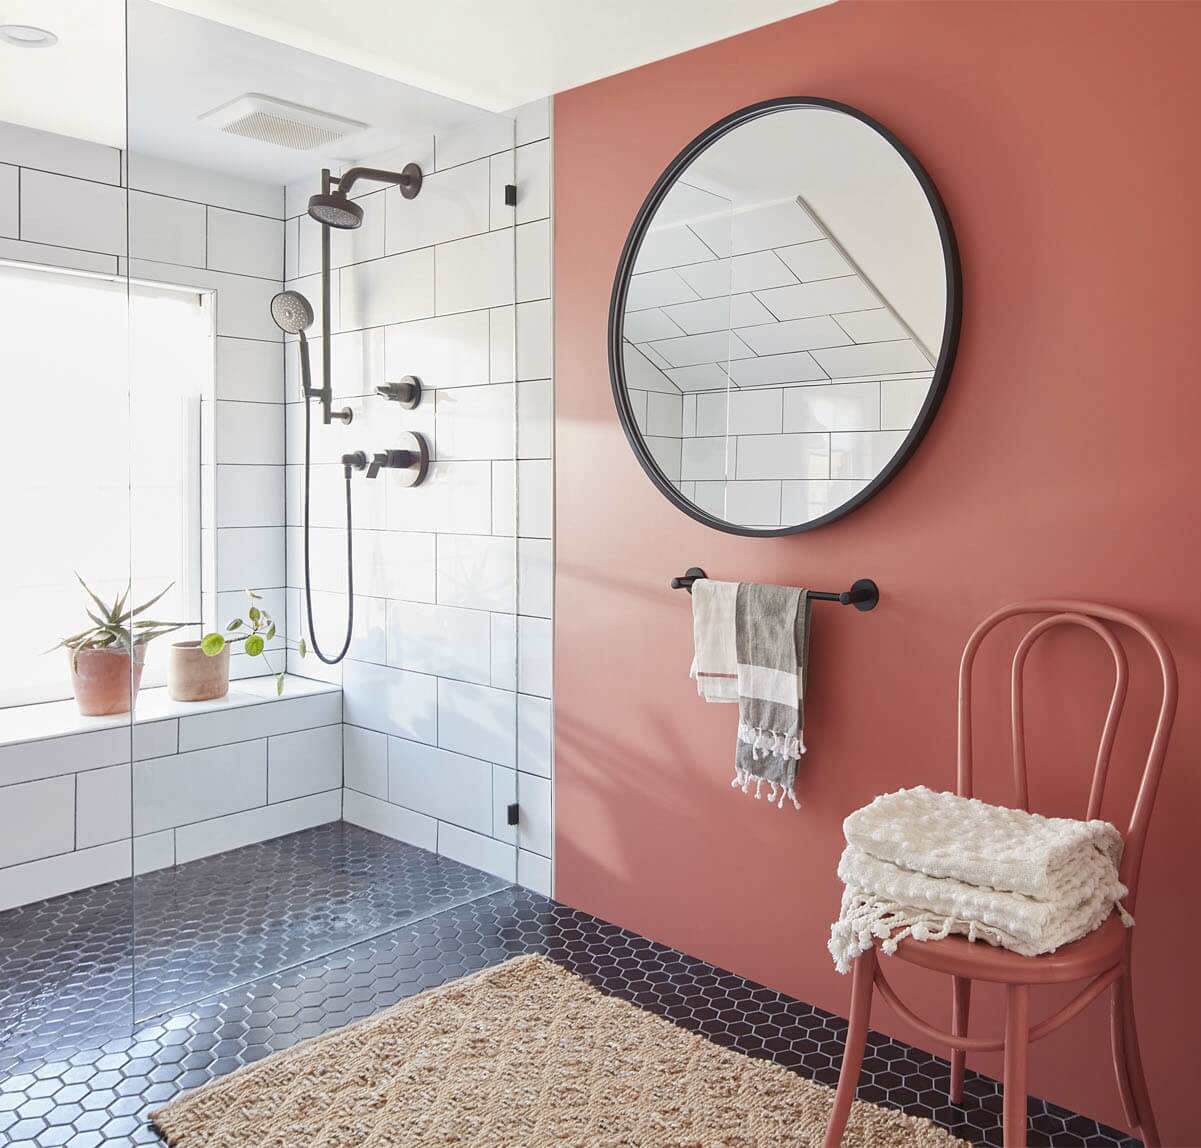 Wild Flower Bathroom benjamin moore color trends 2022 nordroom Home Decor Color Trends 2022: Natural Hues with Bright Pops